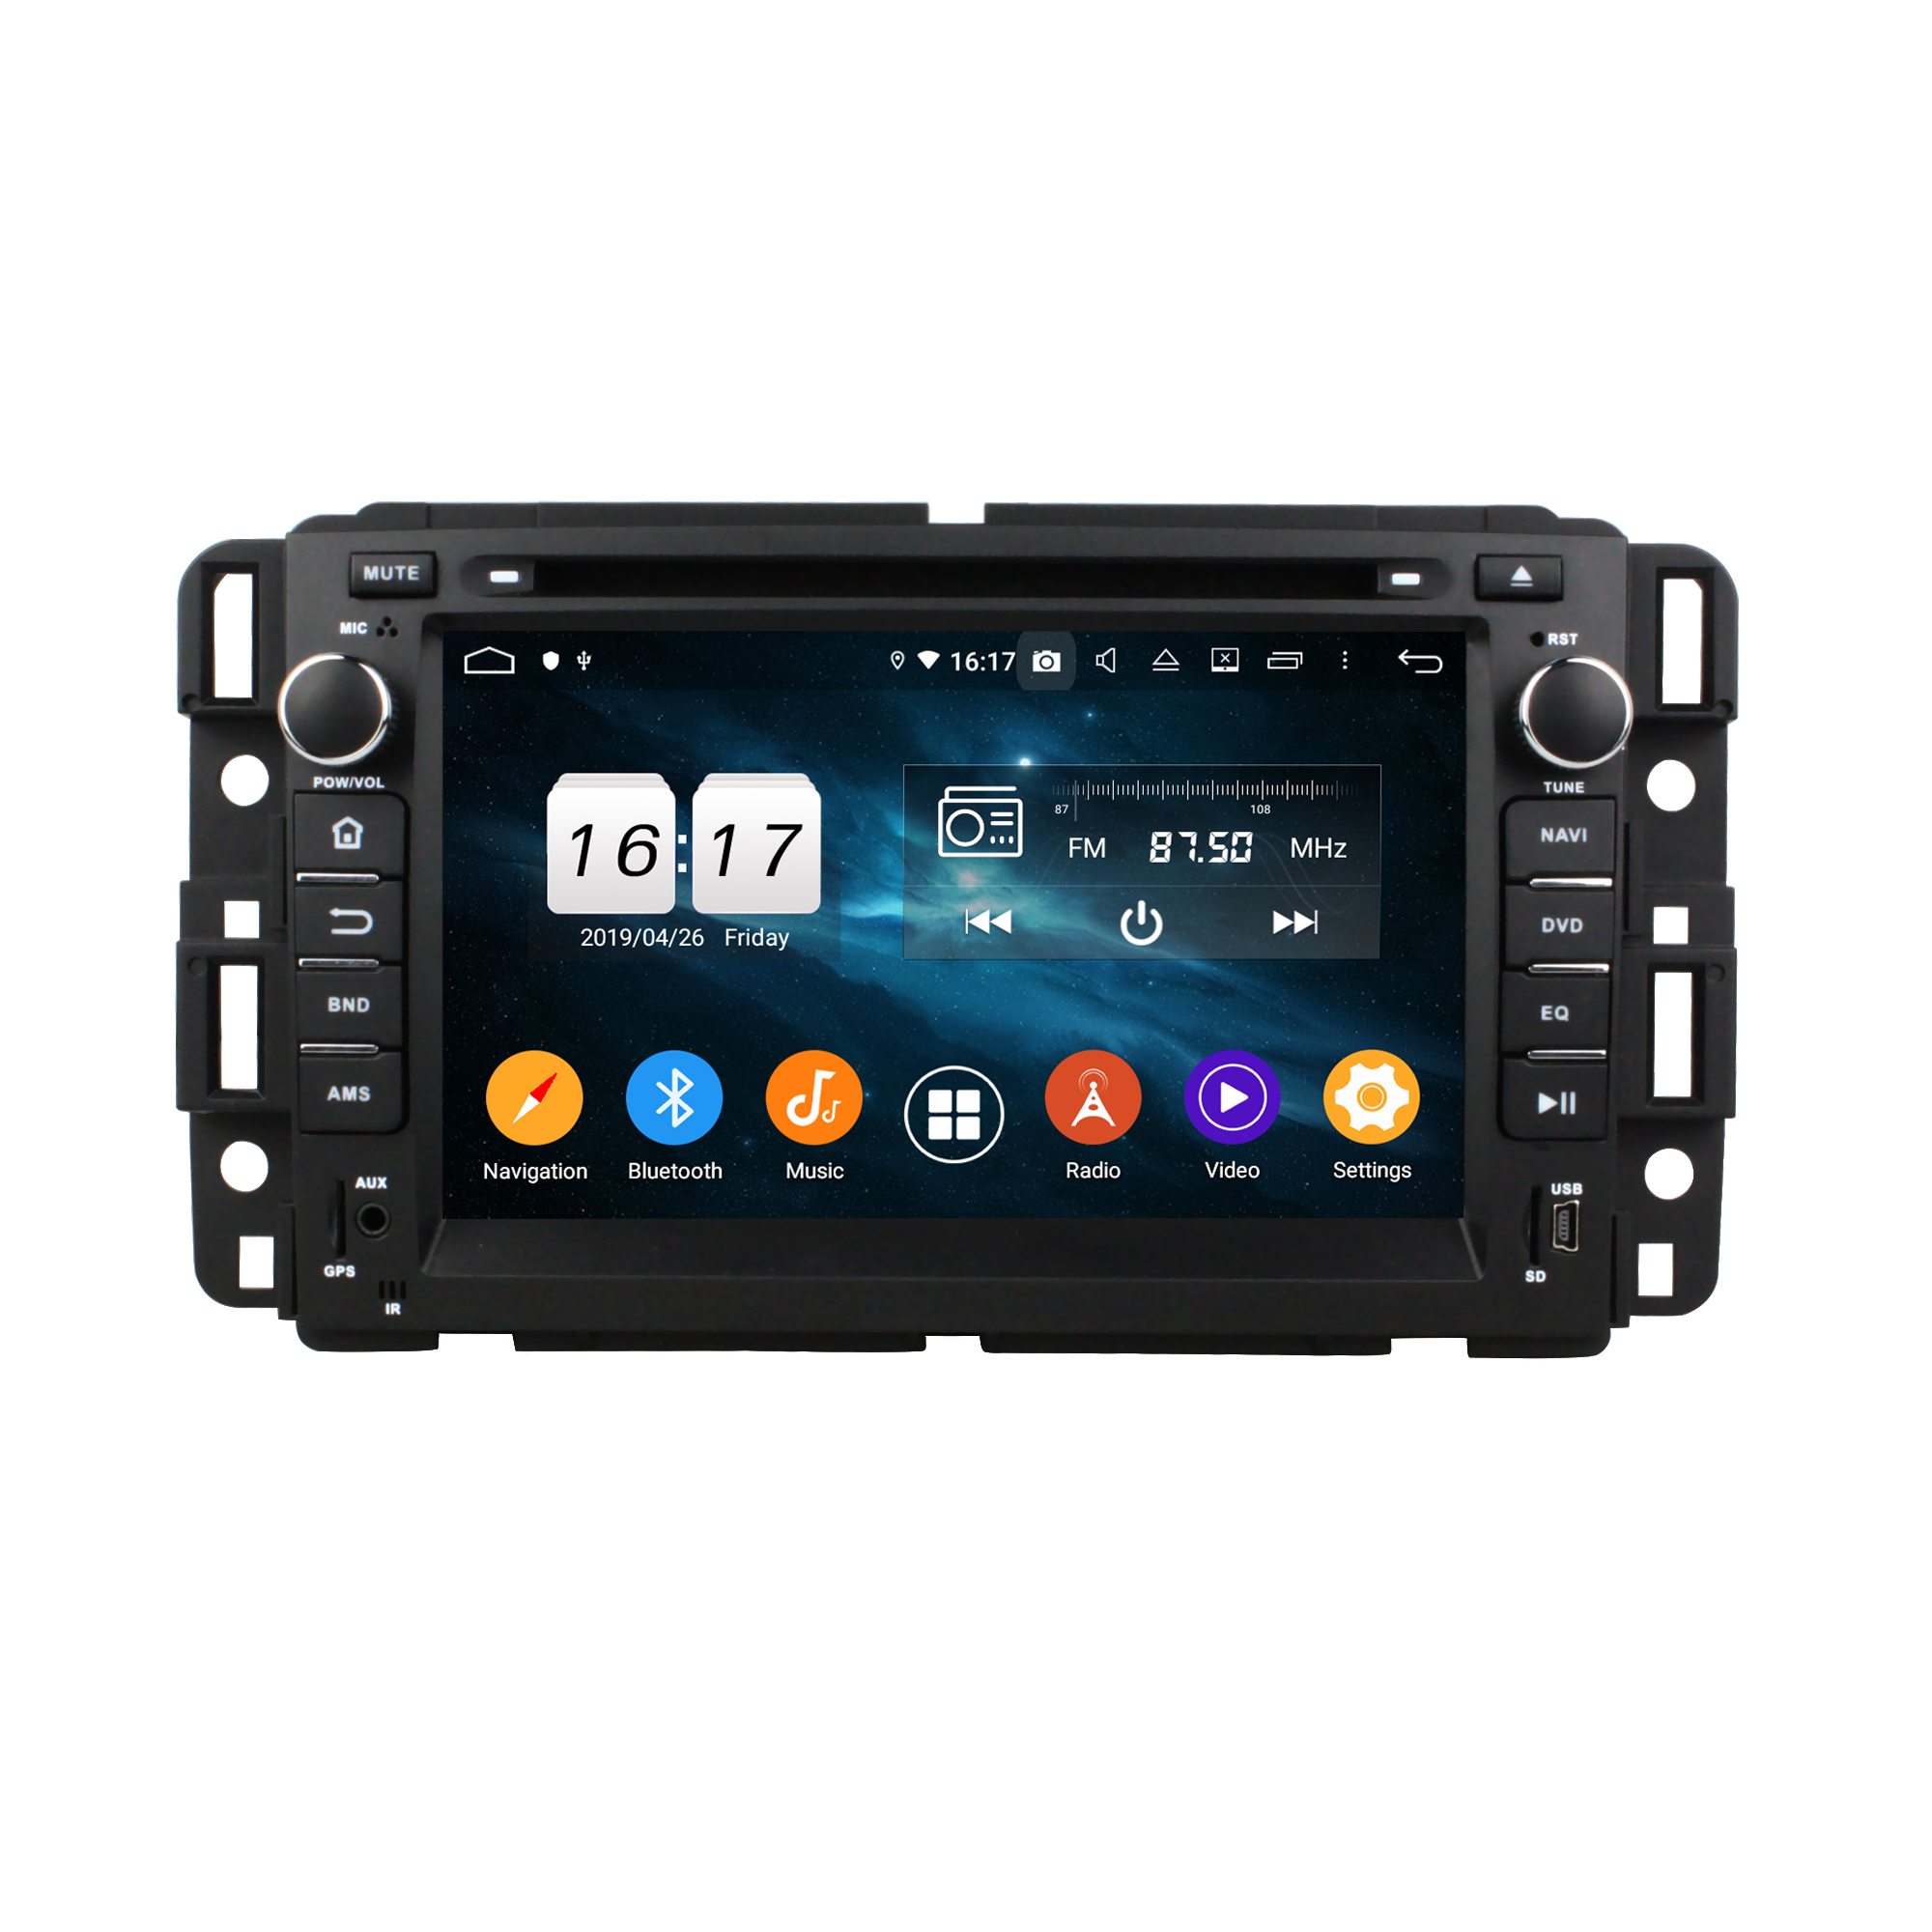 KD-7036 KLYDE Cheap Bluetooth Car Stereo with GPS Navigation For GMC Yukon/Tahoe